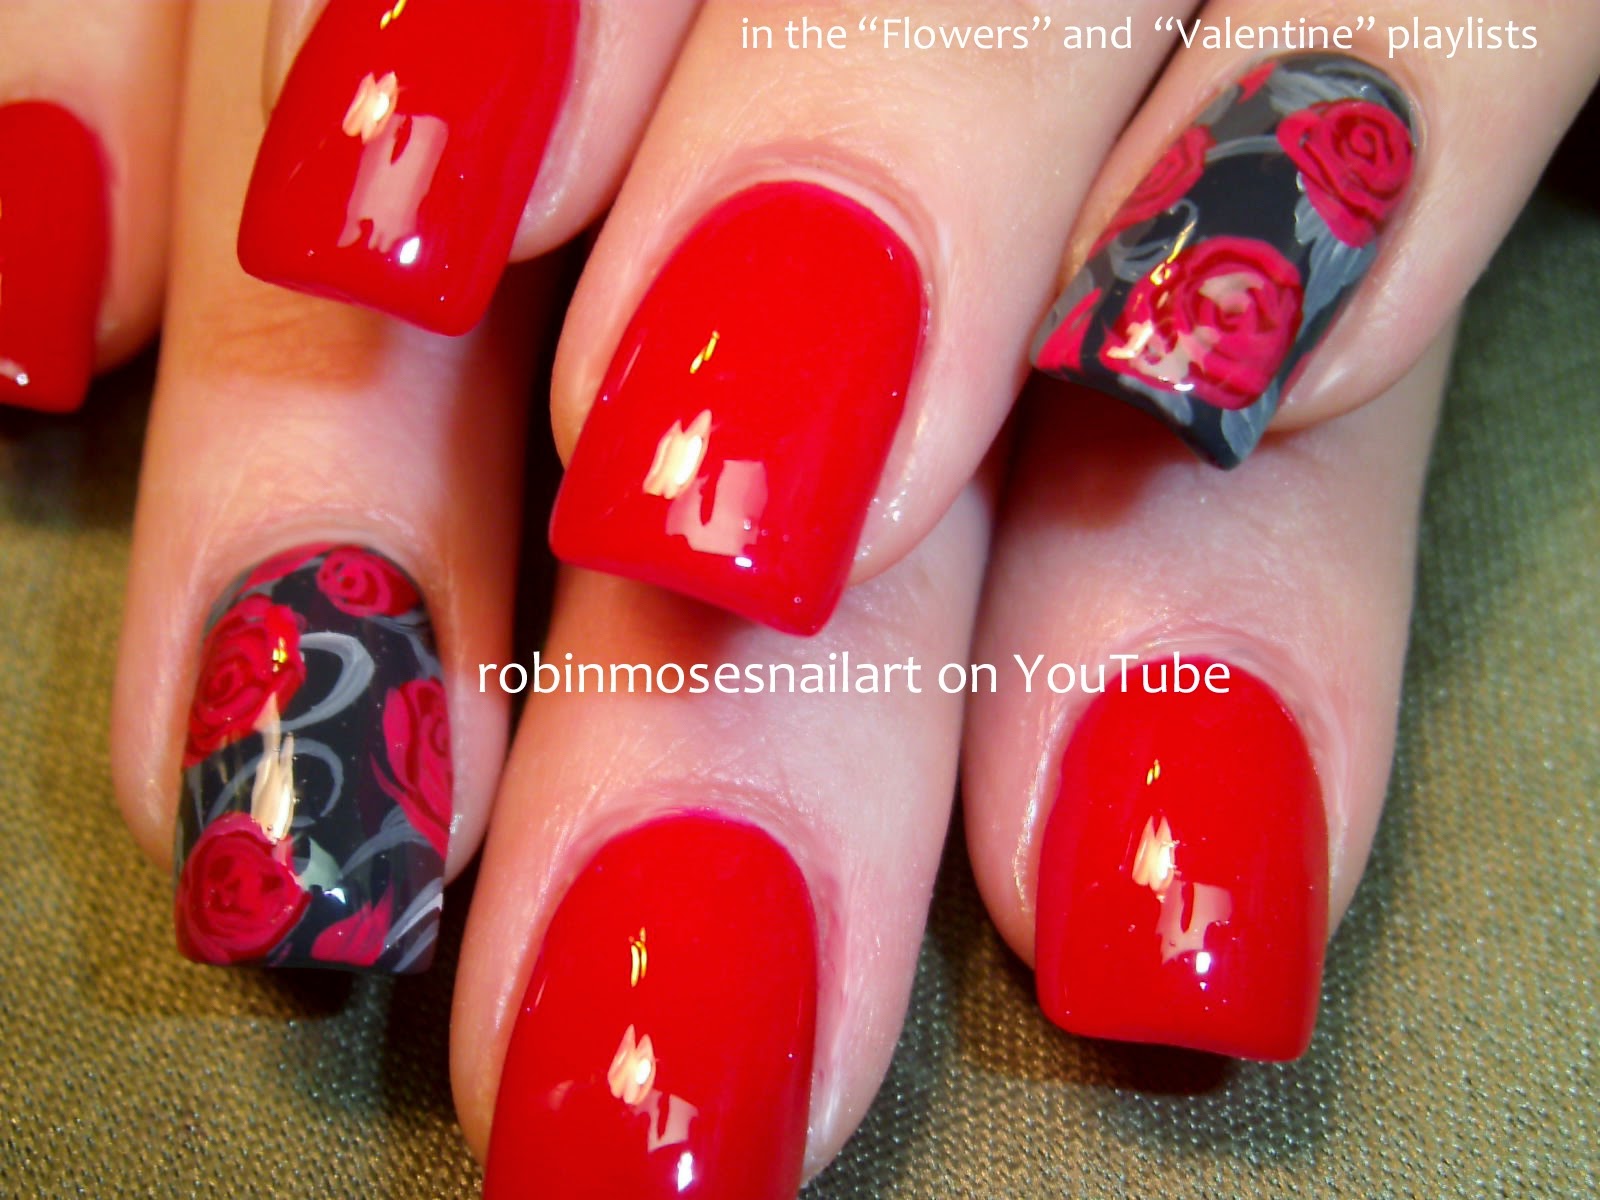 Dark Red and Floral Nail Art - wide 5